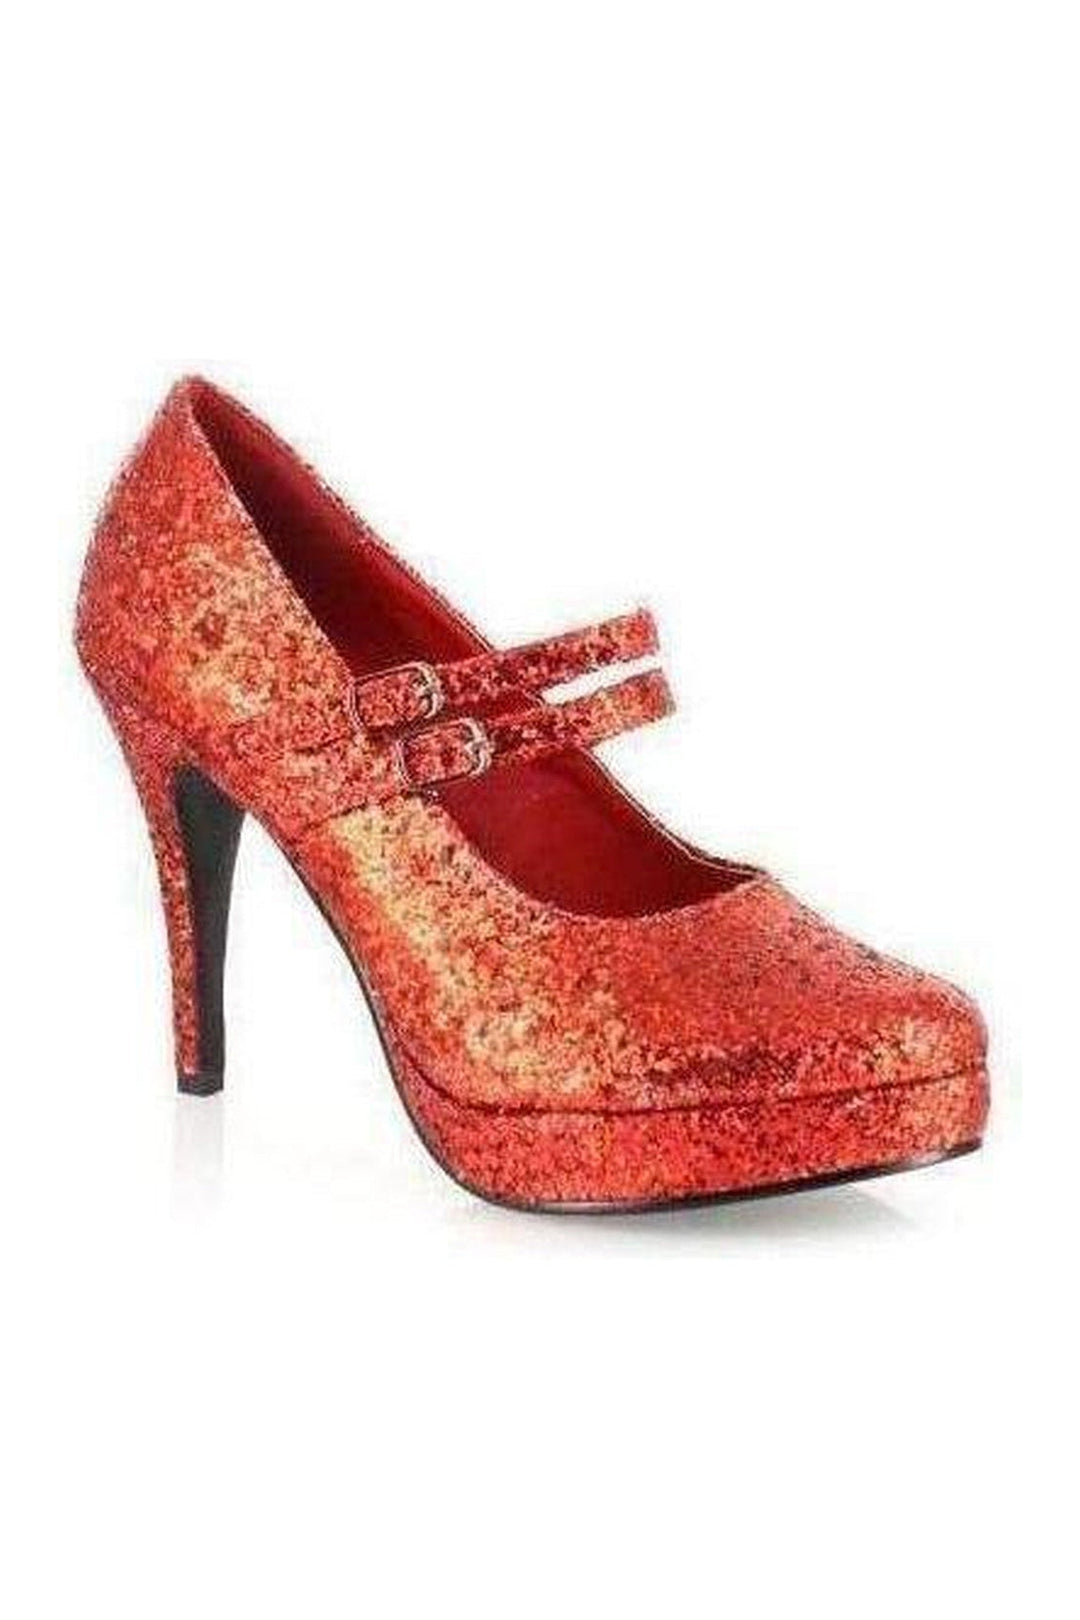 421-JANE-G Mary Jane | Red Glitter-Ellie Shoes-Red-Mary Janes-SEXYSHOES.COM